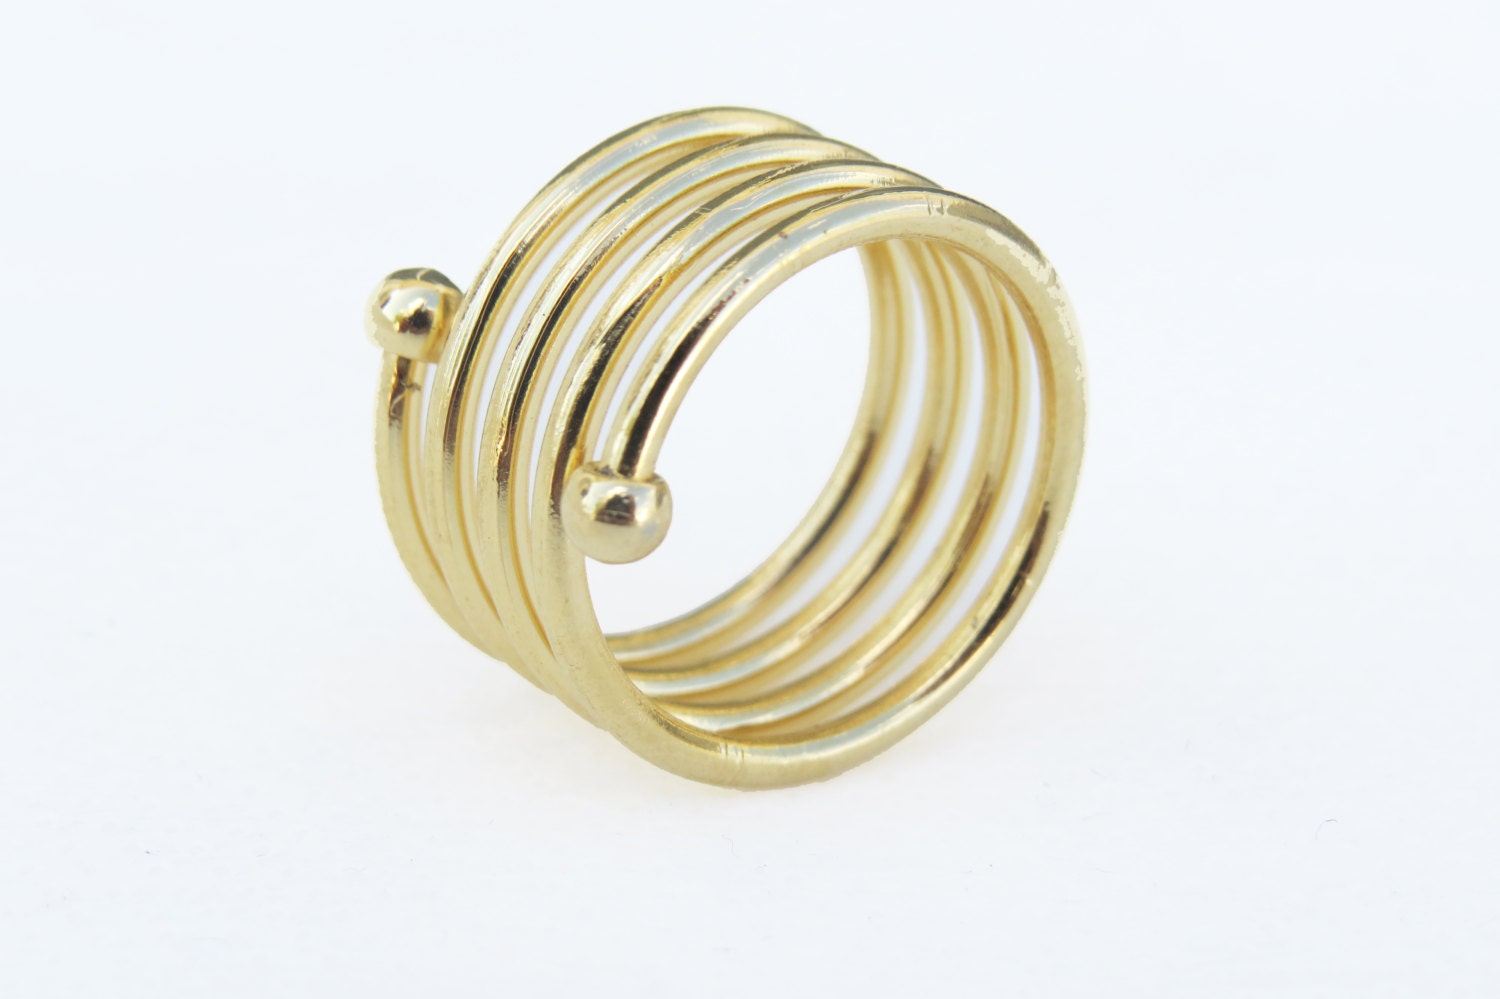 Gold ring Spiral ring Wide ring Spiral band ring by HLcollection